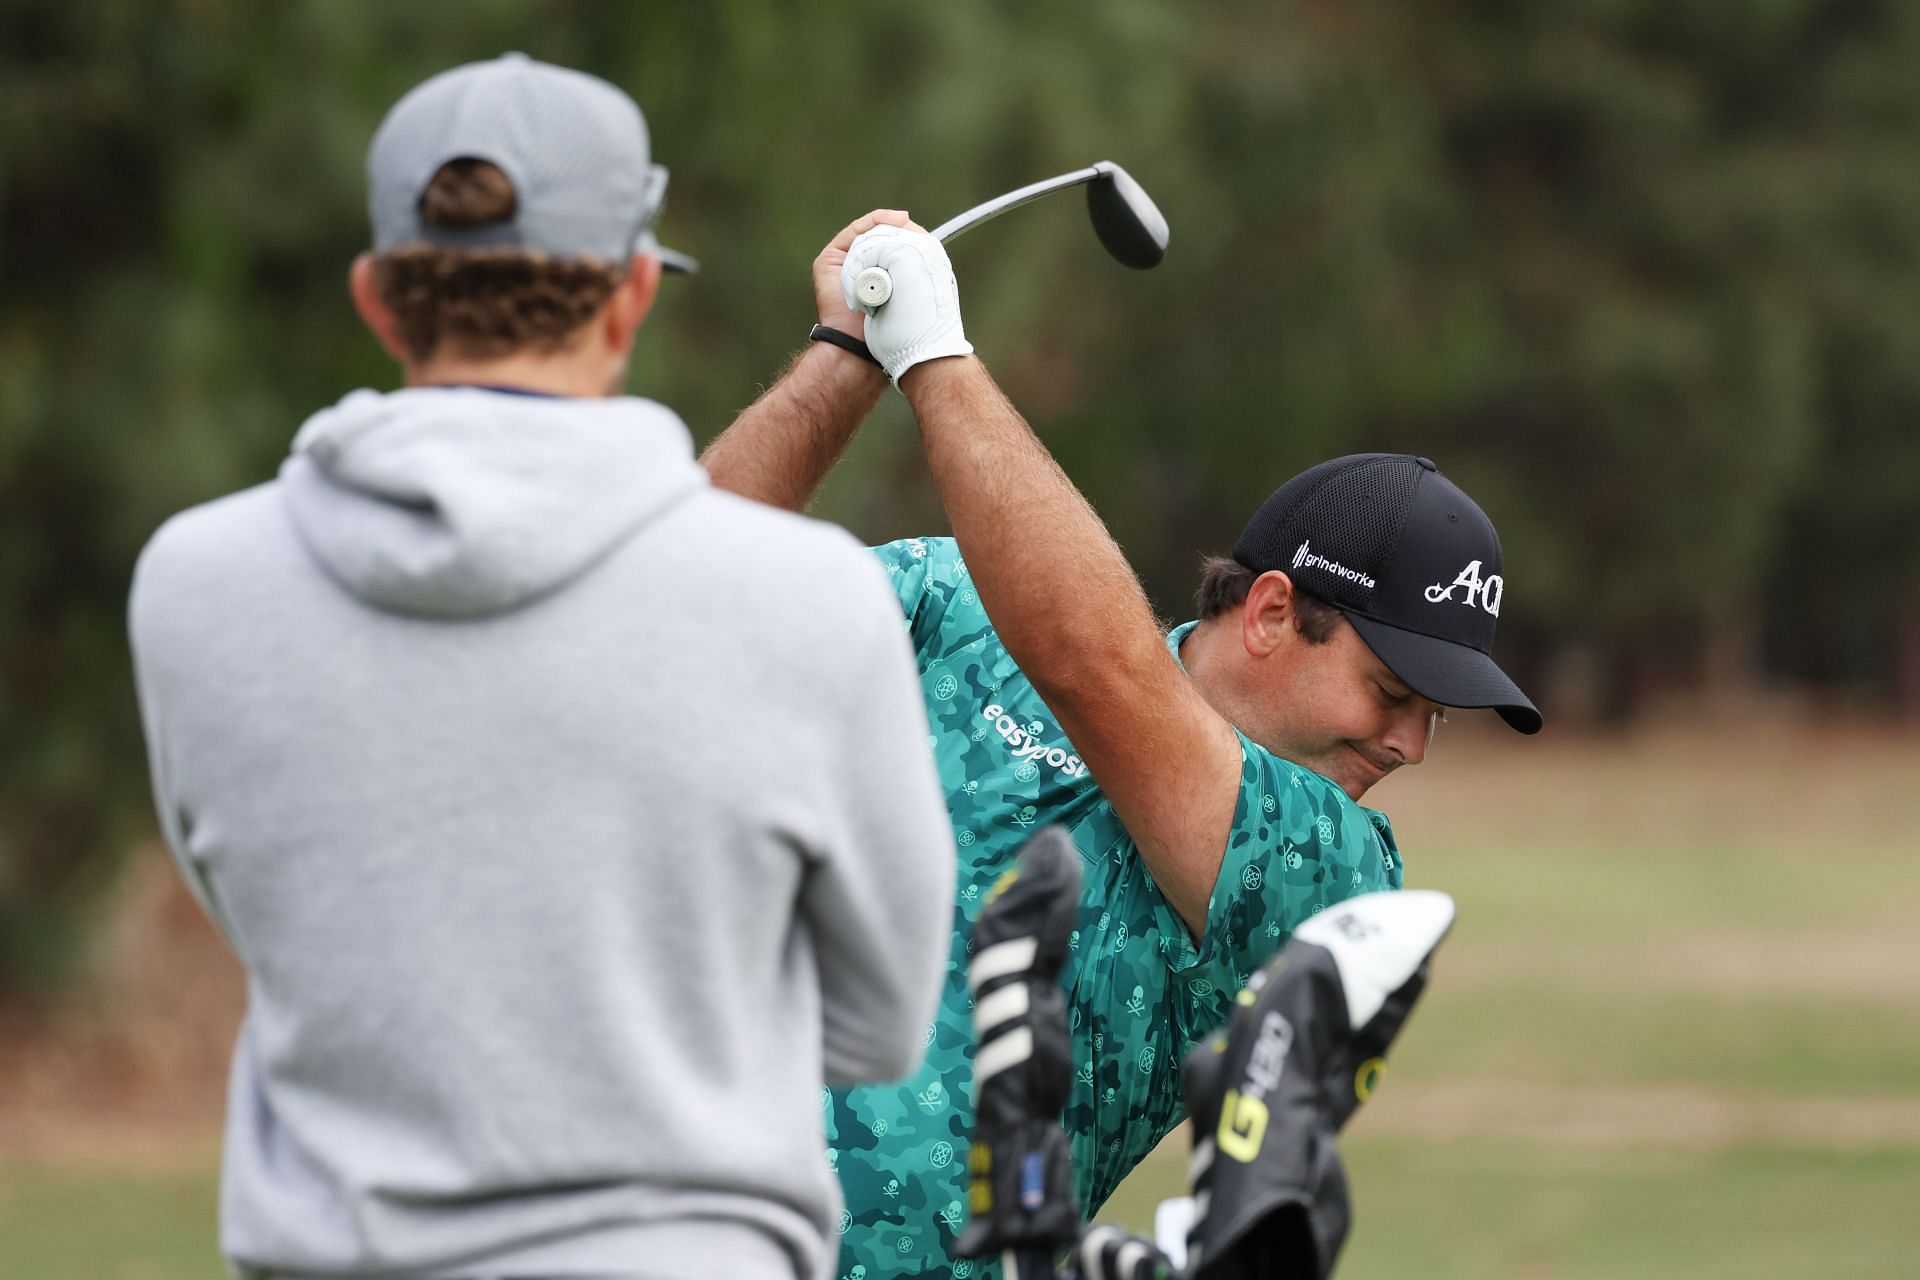 Patrick Reed hits on the range as his caddie Kessler Karain looks on during a practice round prior to the 123rd U.S. Open Championship at The Los Angeles Country Club